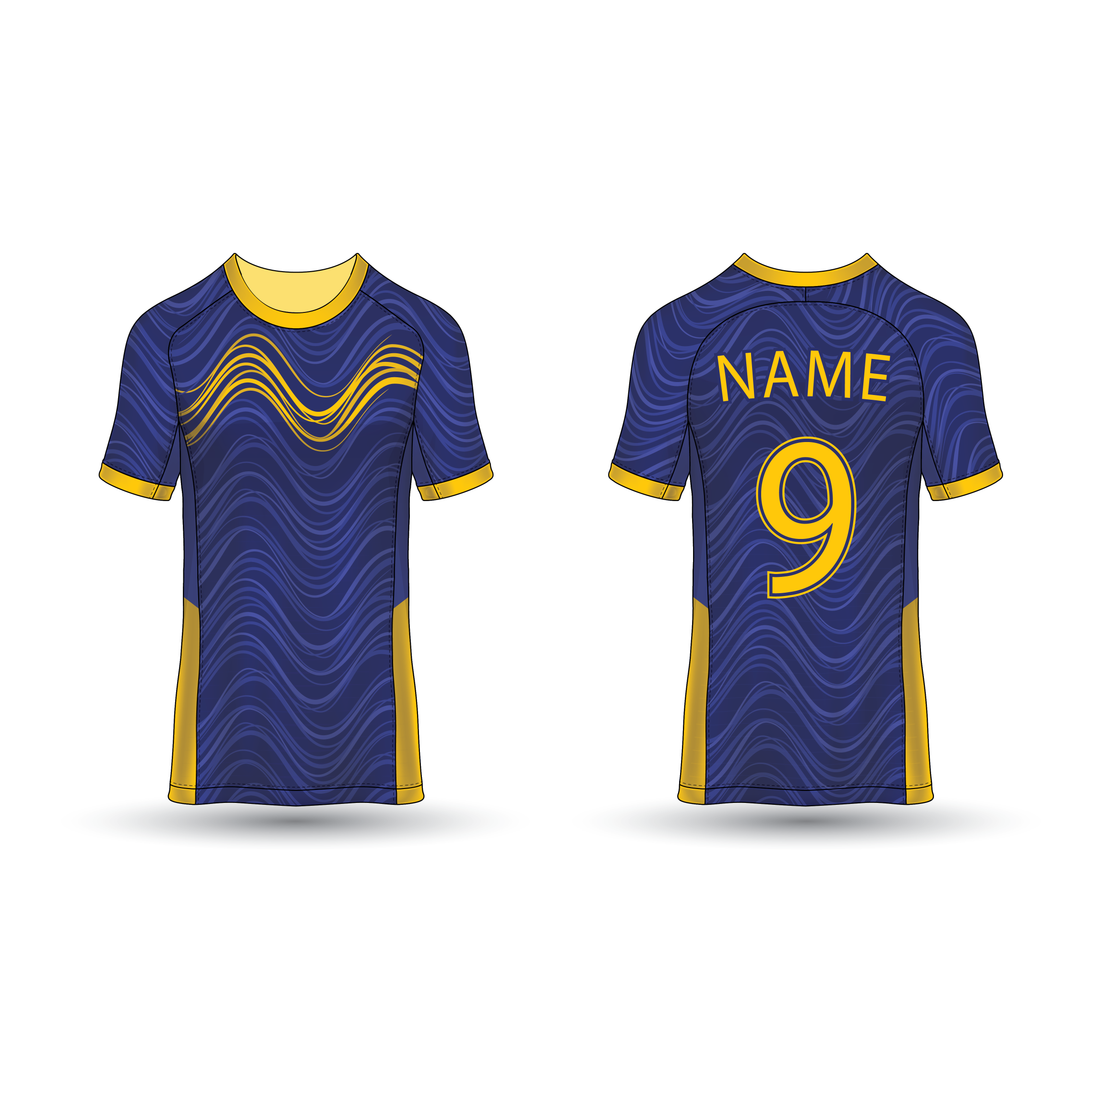 NEXT PRINT All Over Printed Customized Sublimation T-Shirt Unisex Sports Jersey Player Name & Number, Team Name NP50000223